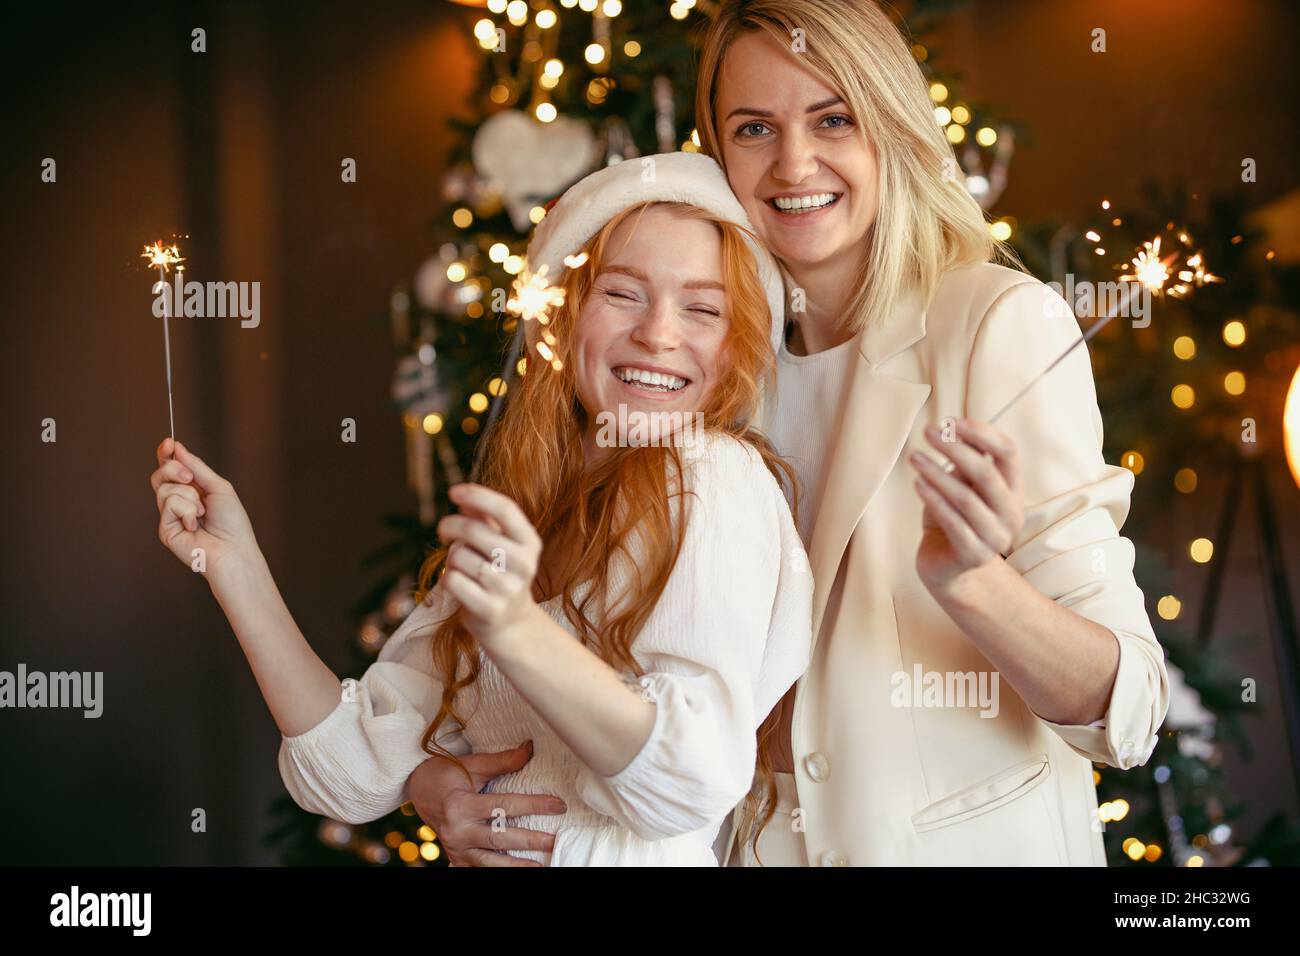 lesbian couple having dinner celebrating a holiday Girls burn sparklers and smile at the camera Stock Photo